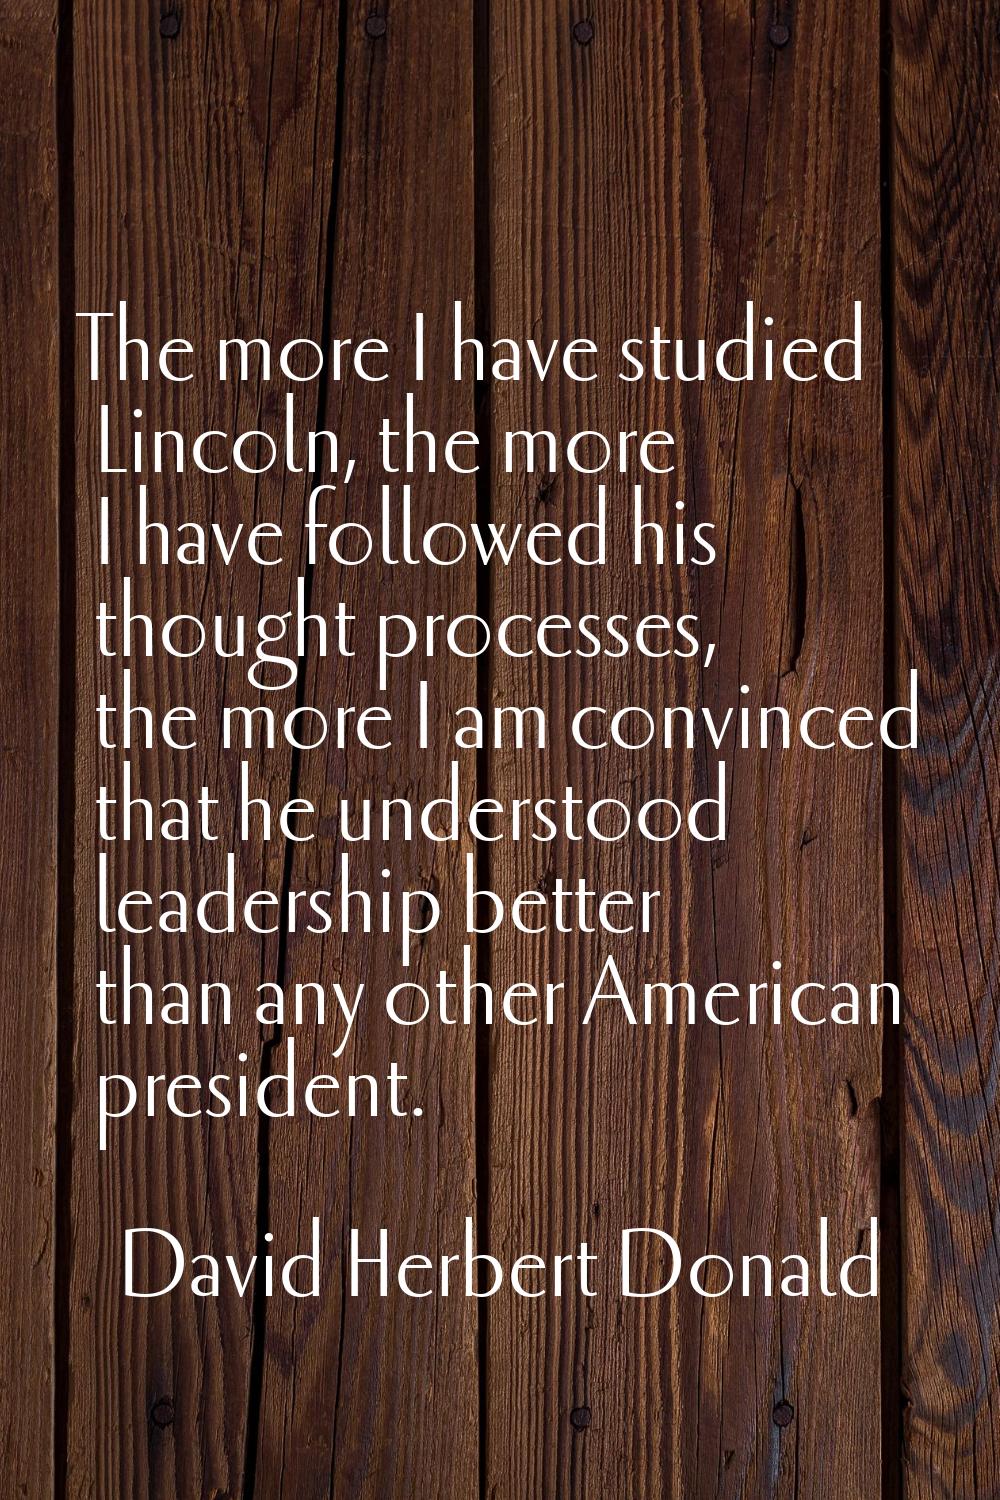 The more I have studied Lincoln, the more I have followed his thought processes, the more I am conv